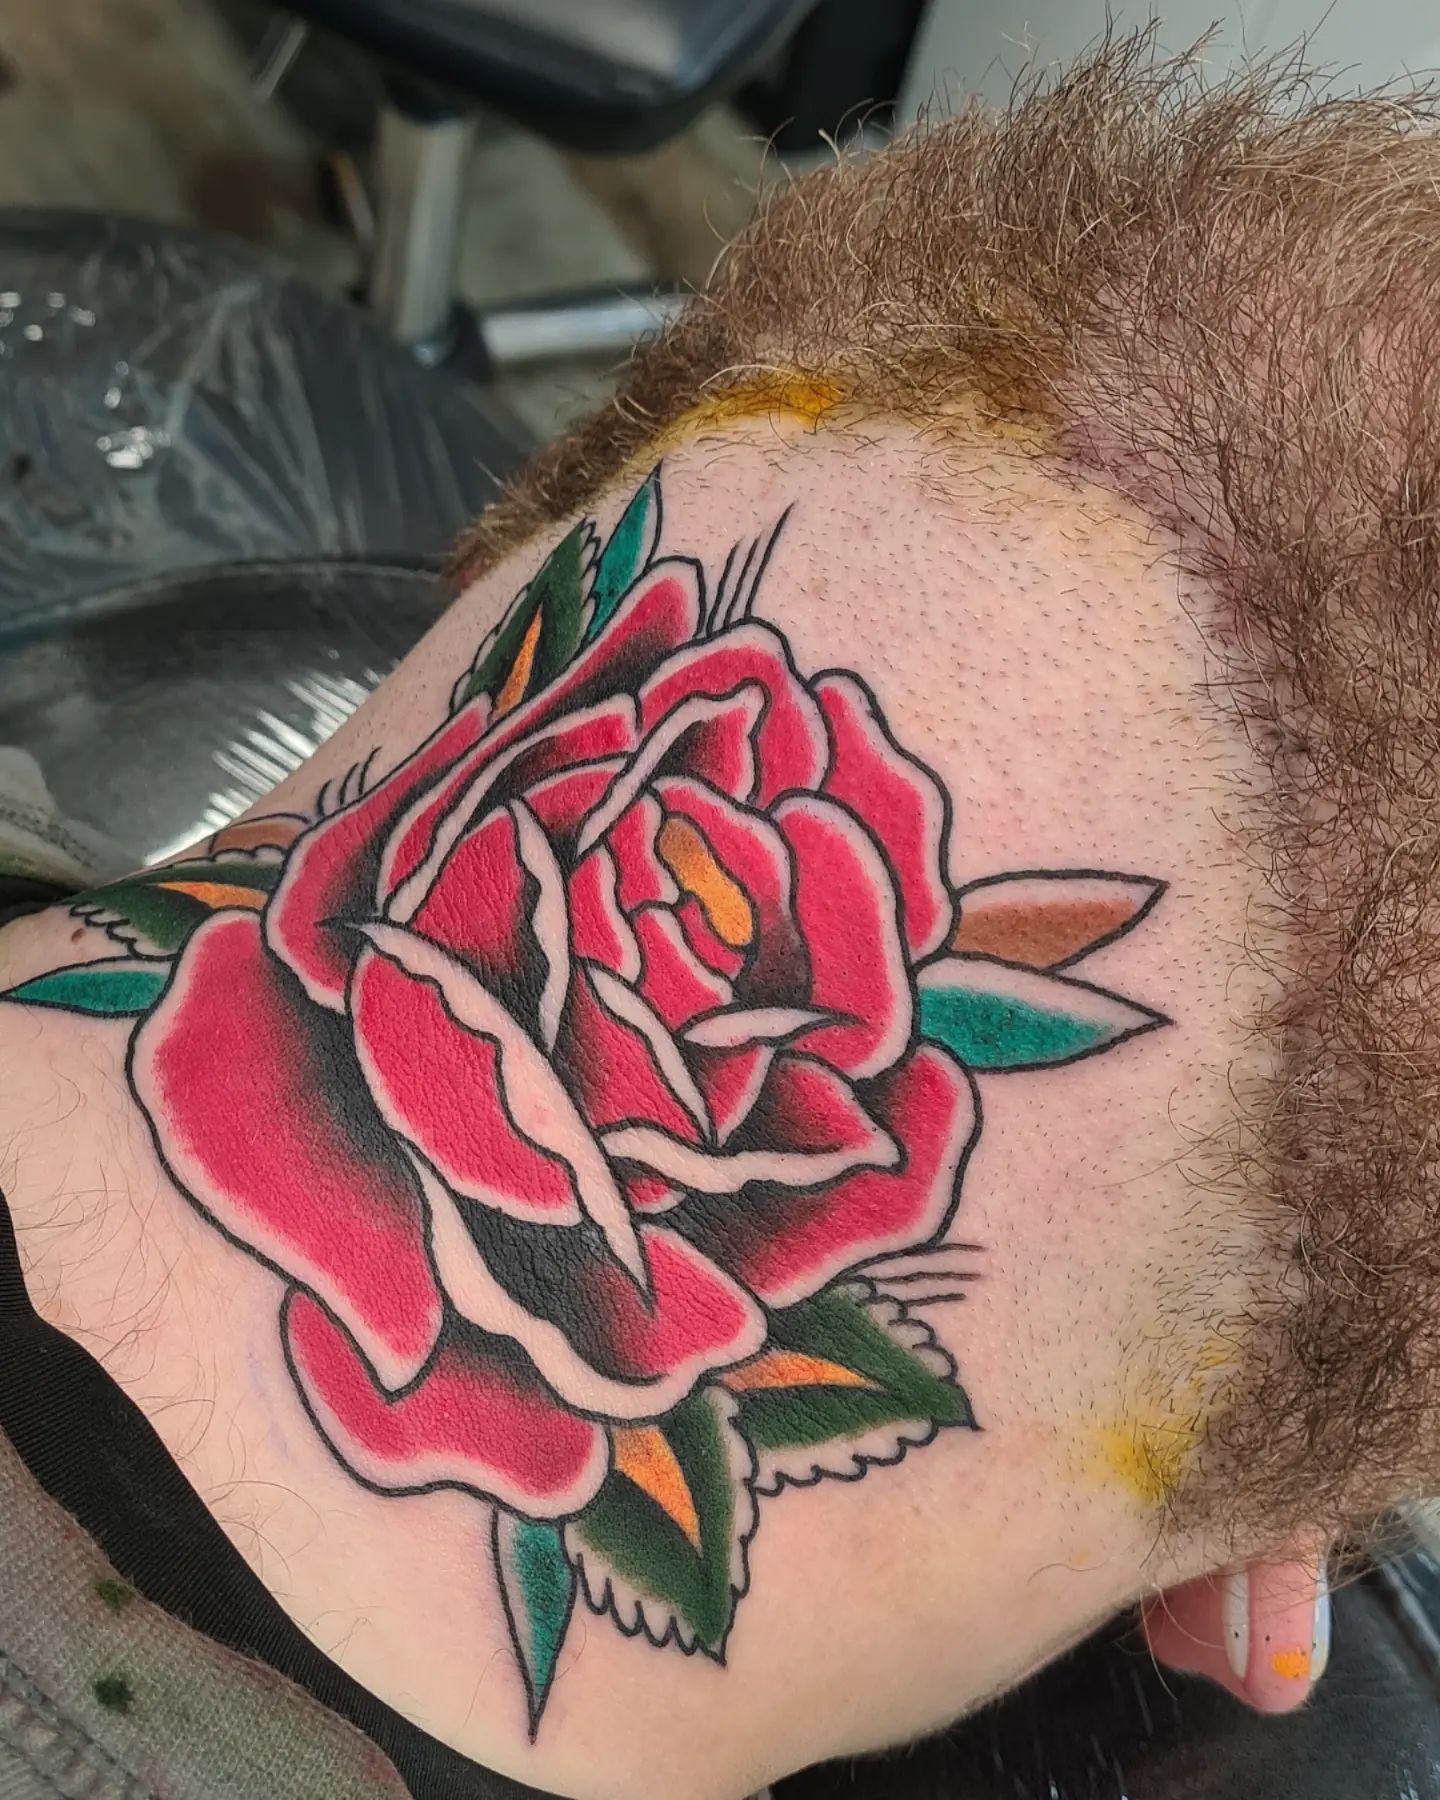 An old school rose design that is nicely done by competent artist rocks. The color palette and lines make this tattoo a nice piece. Without doubt, this tattoo will stand out on your throat.